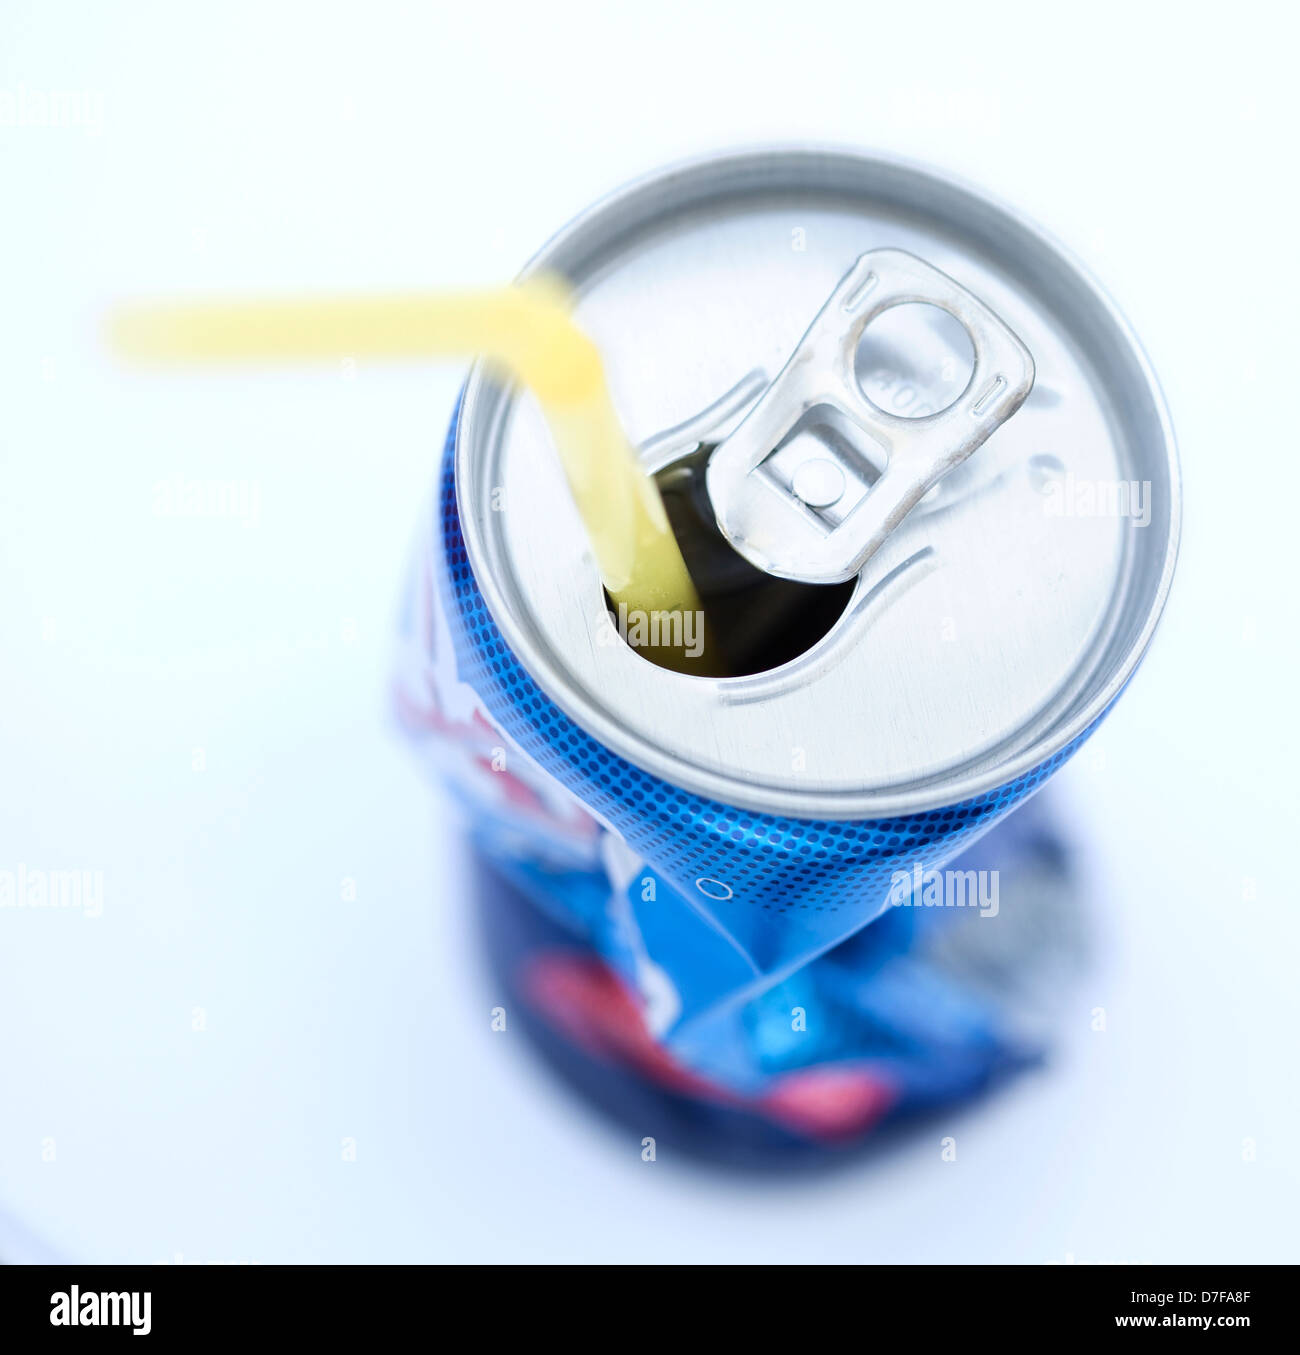 Crushed soda can with straw Stock Photo